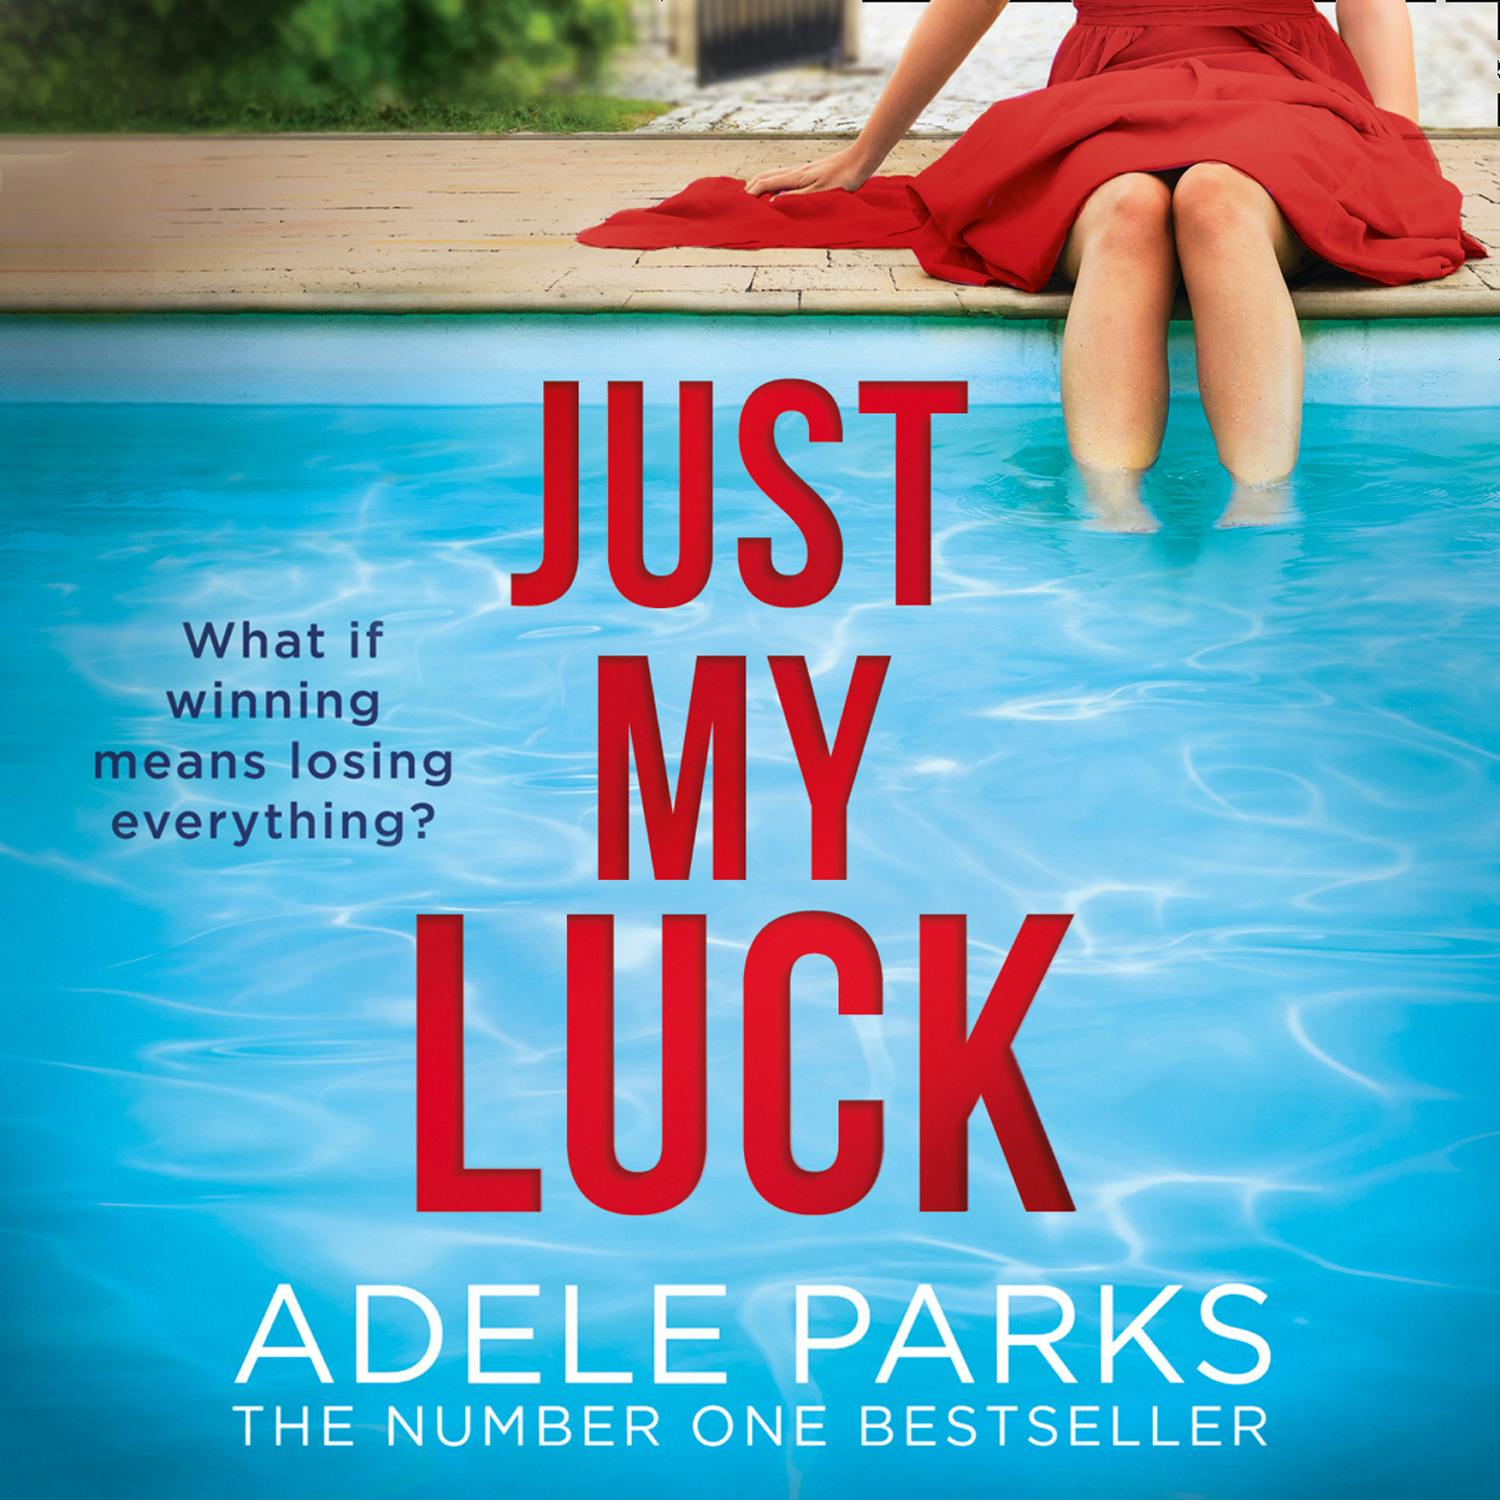 Just My Luck - Adele Parks